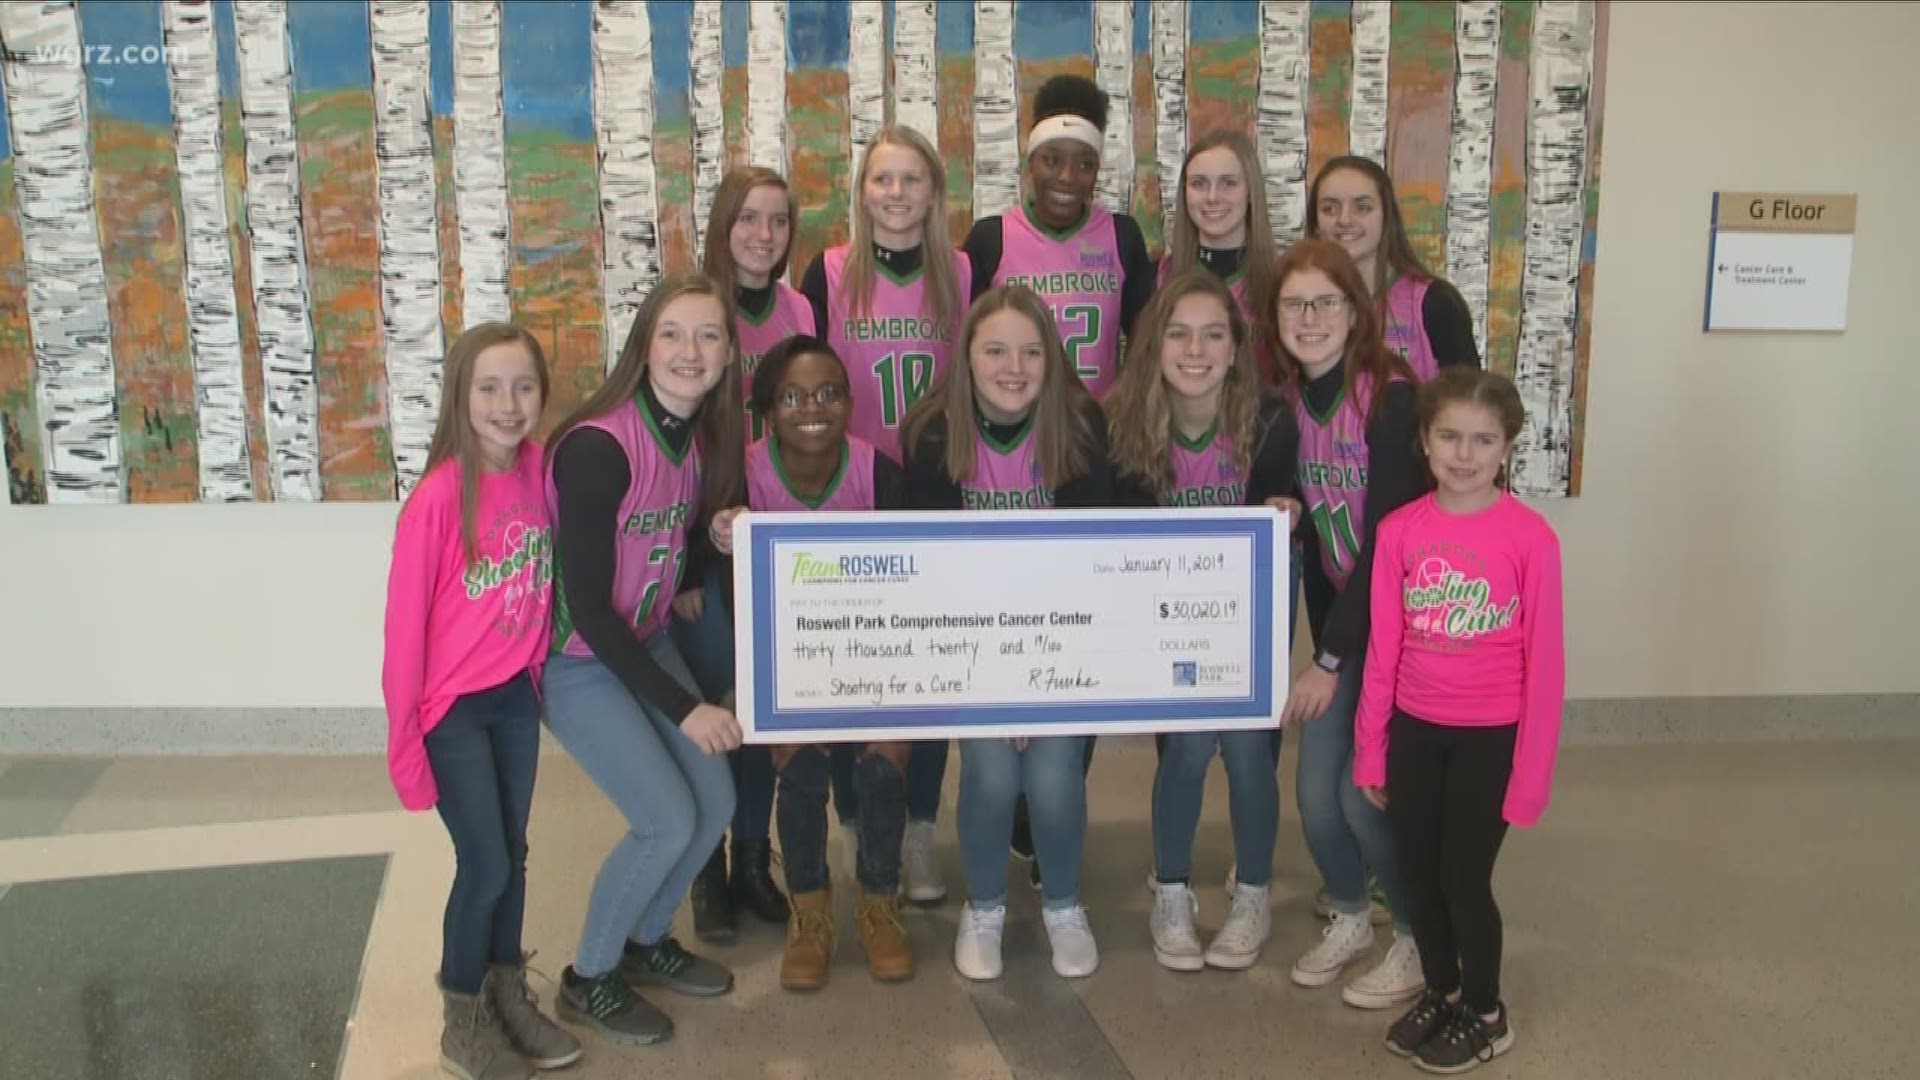 Pembroke Basketball team raised over $30 thousand for Roswell.